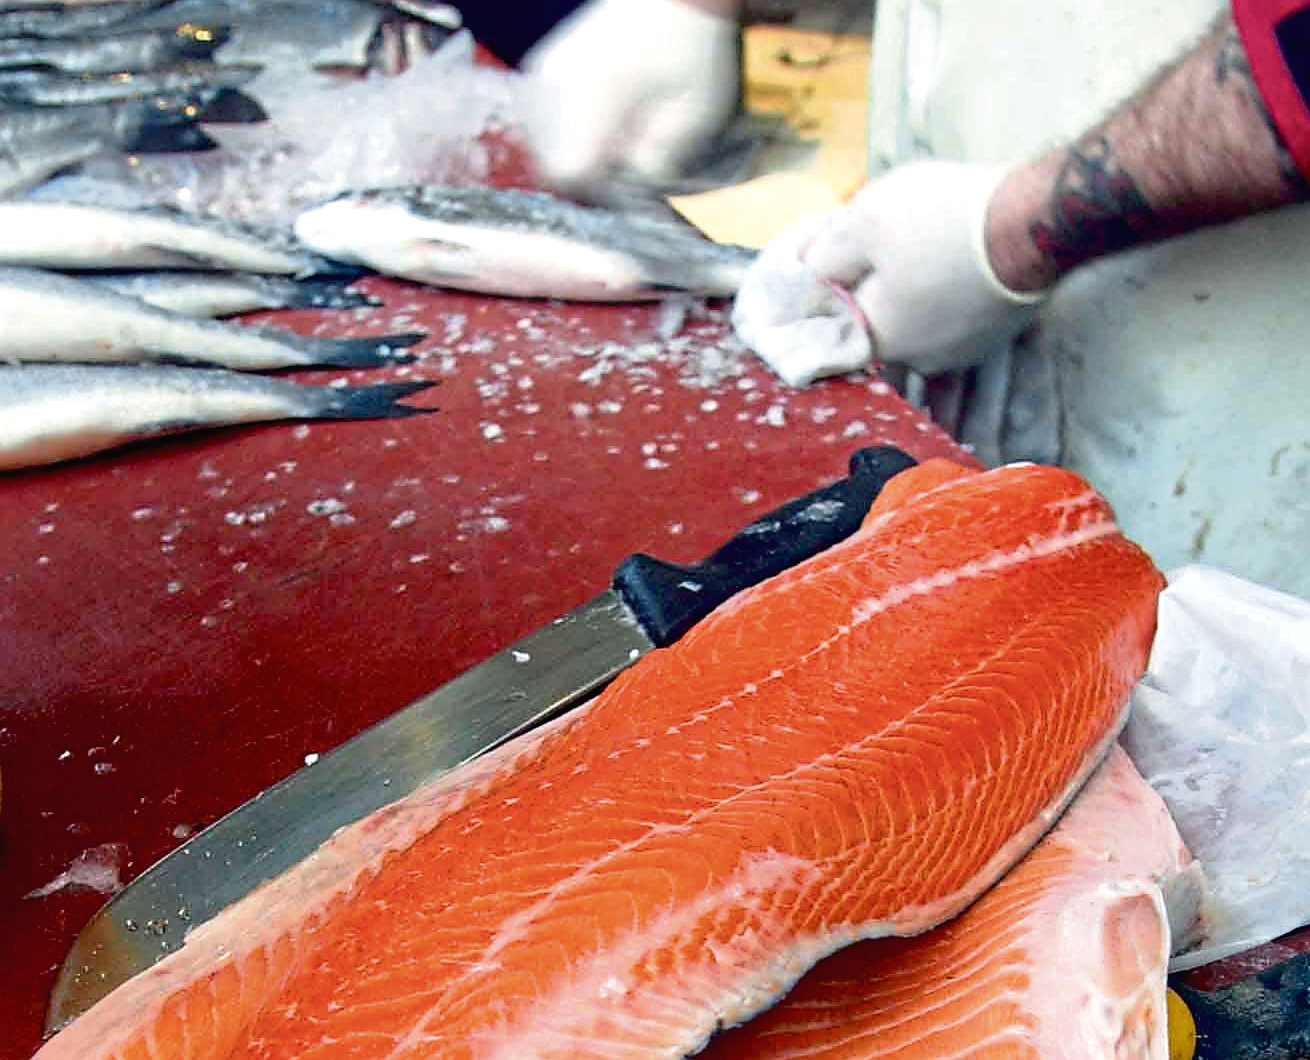 Salmon fillets on sale at a local fish market